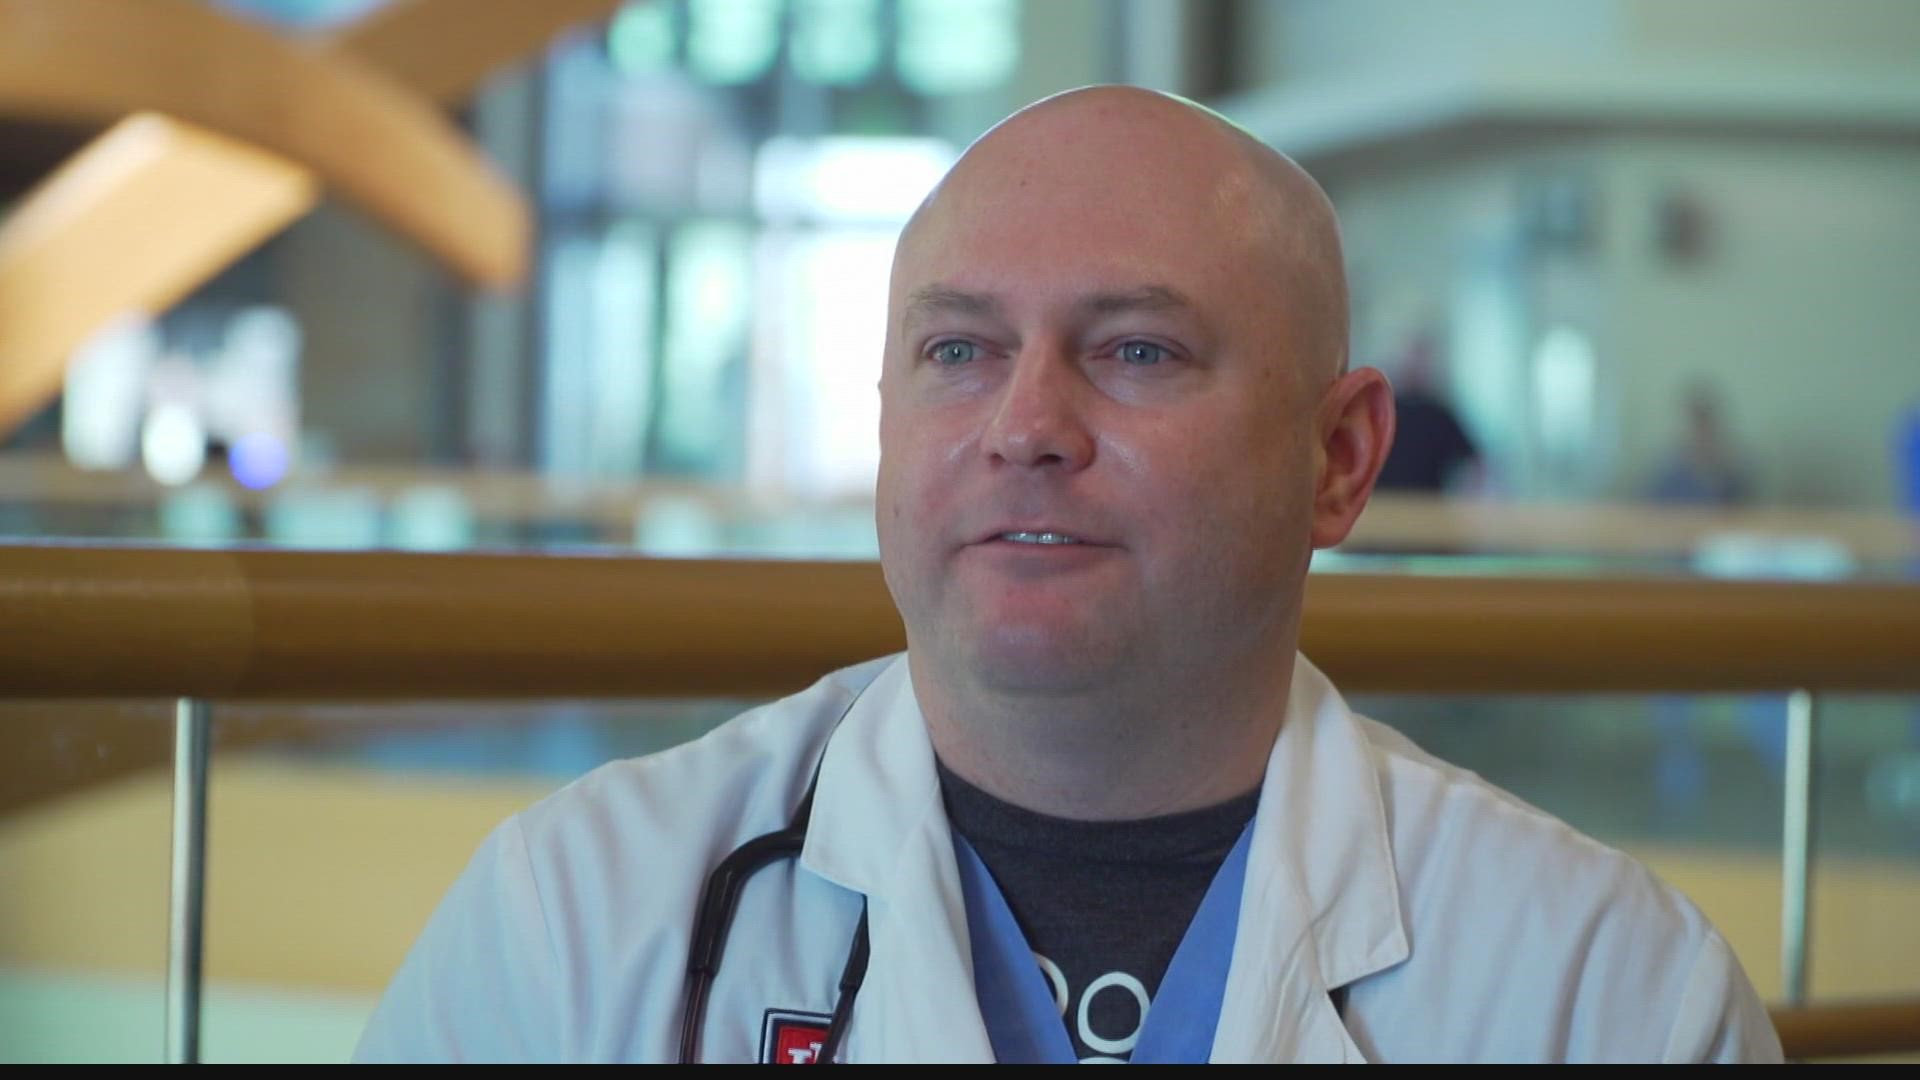 Amid a busy routine as a hospitalist, Dr. Ryan Deweese has found an outlet in the written word.